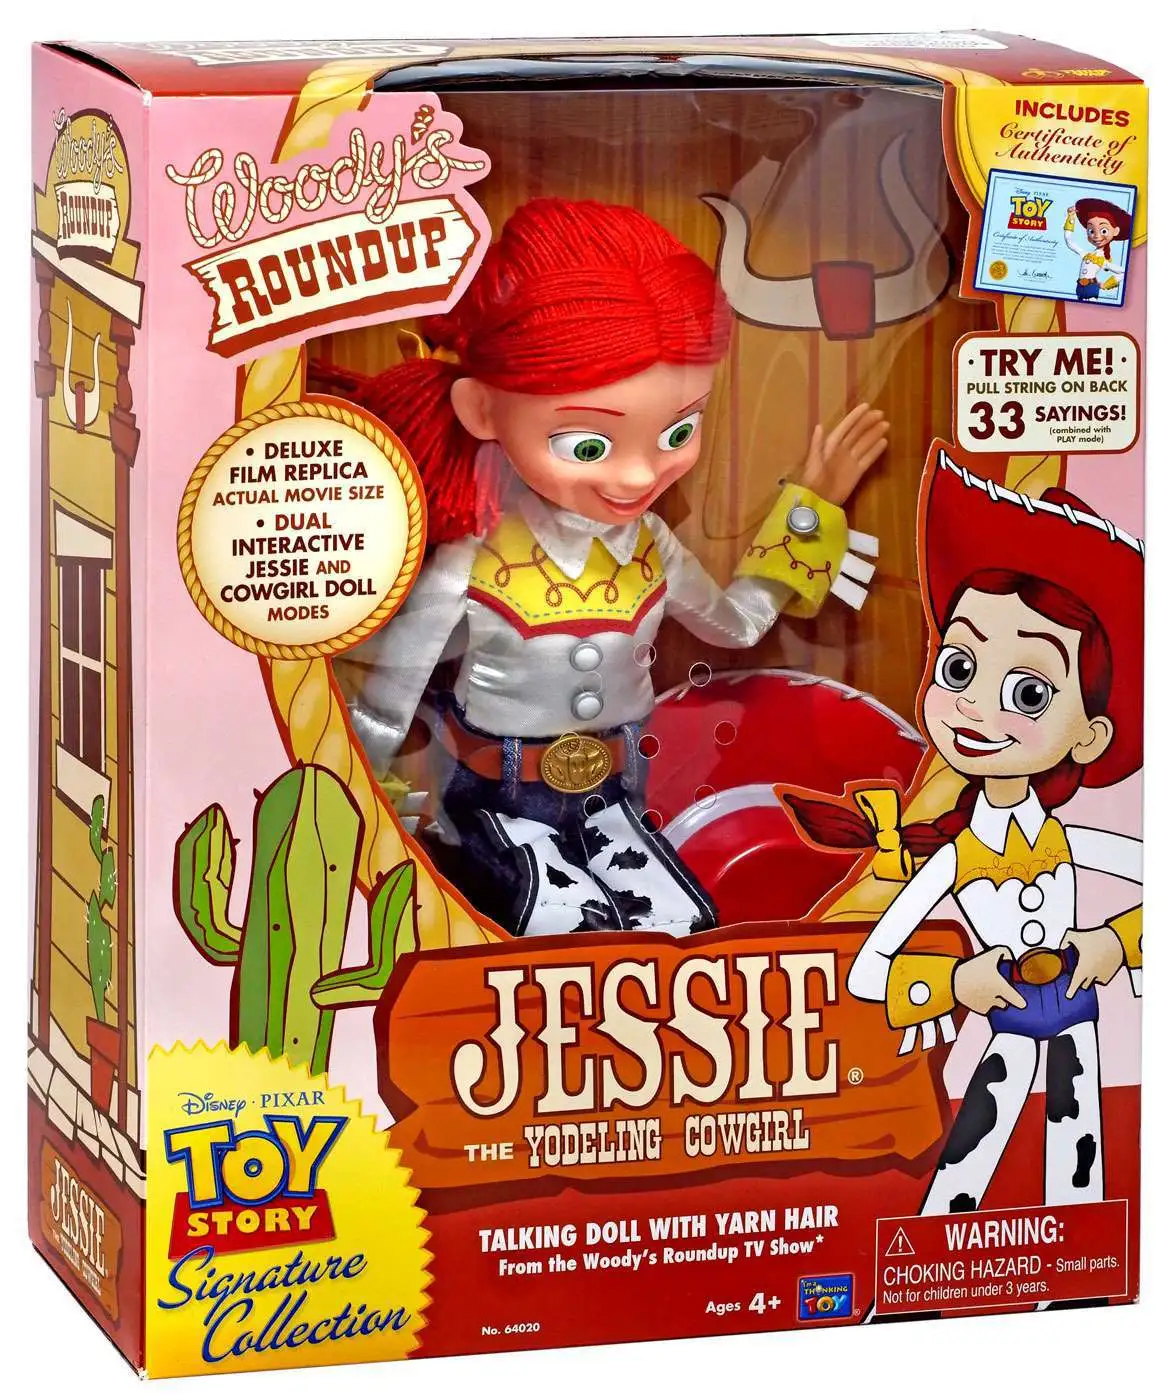 TOY STORY Signature Collection Jessie